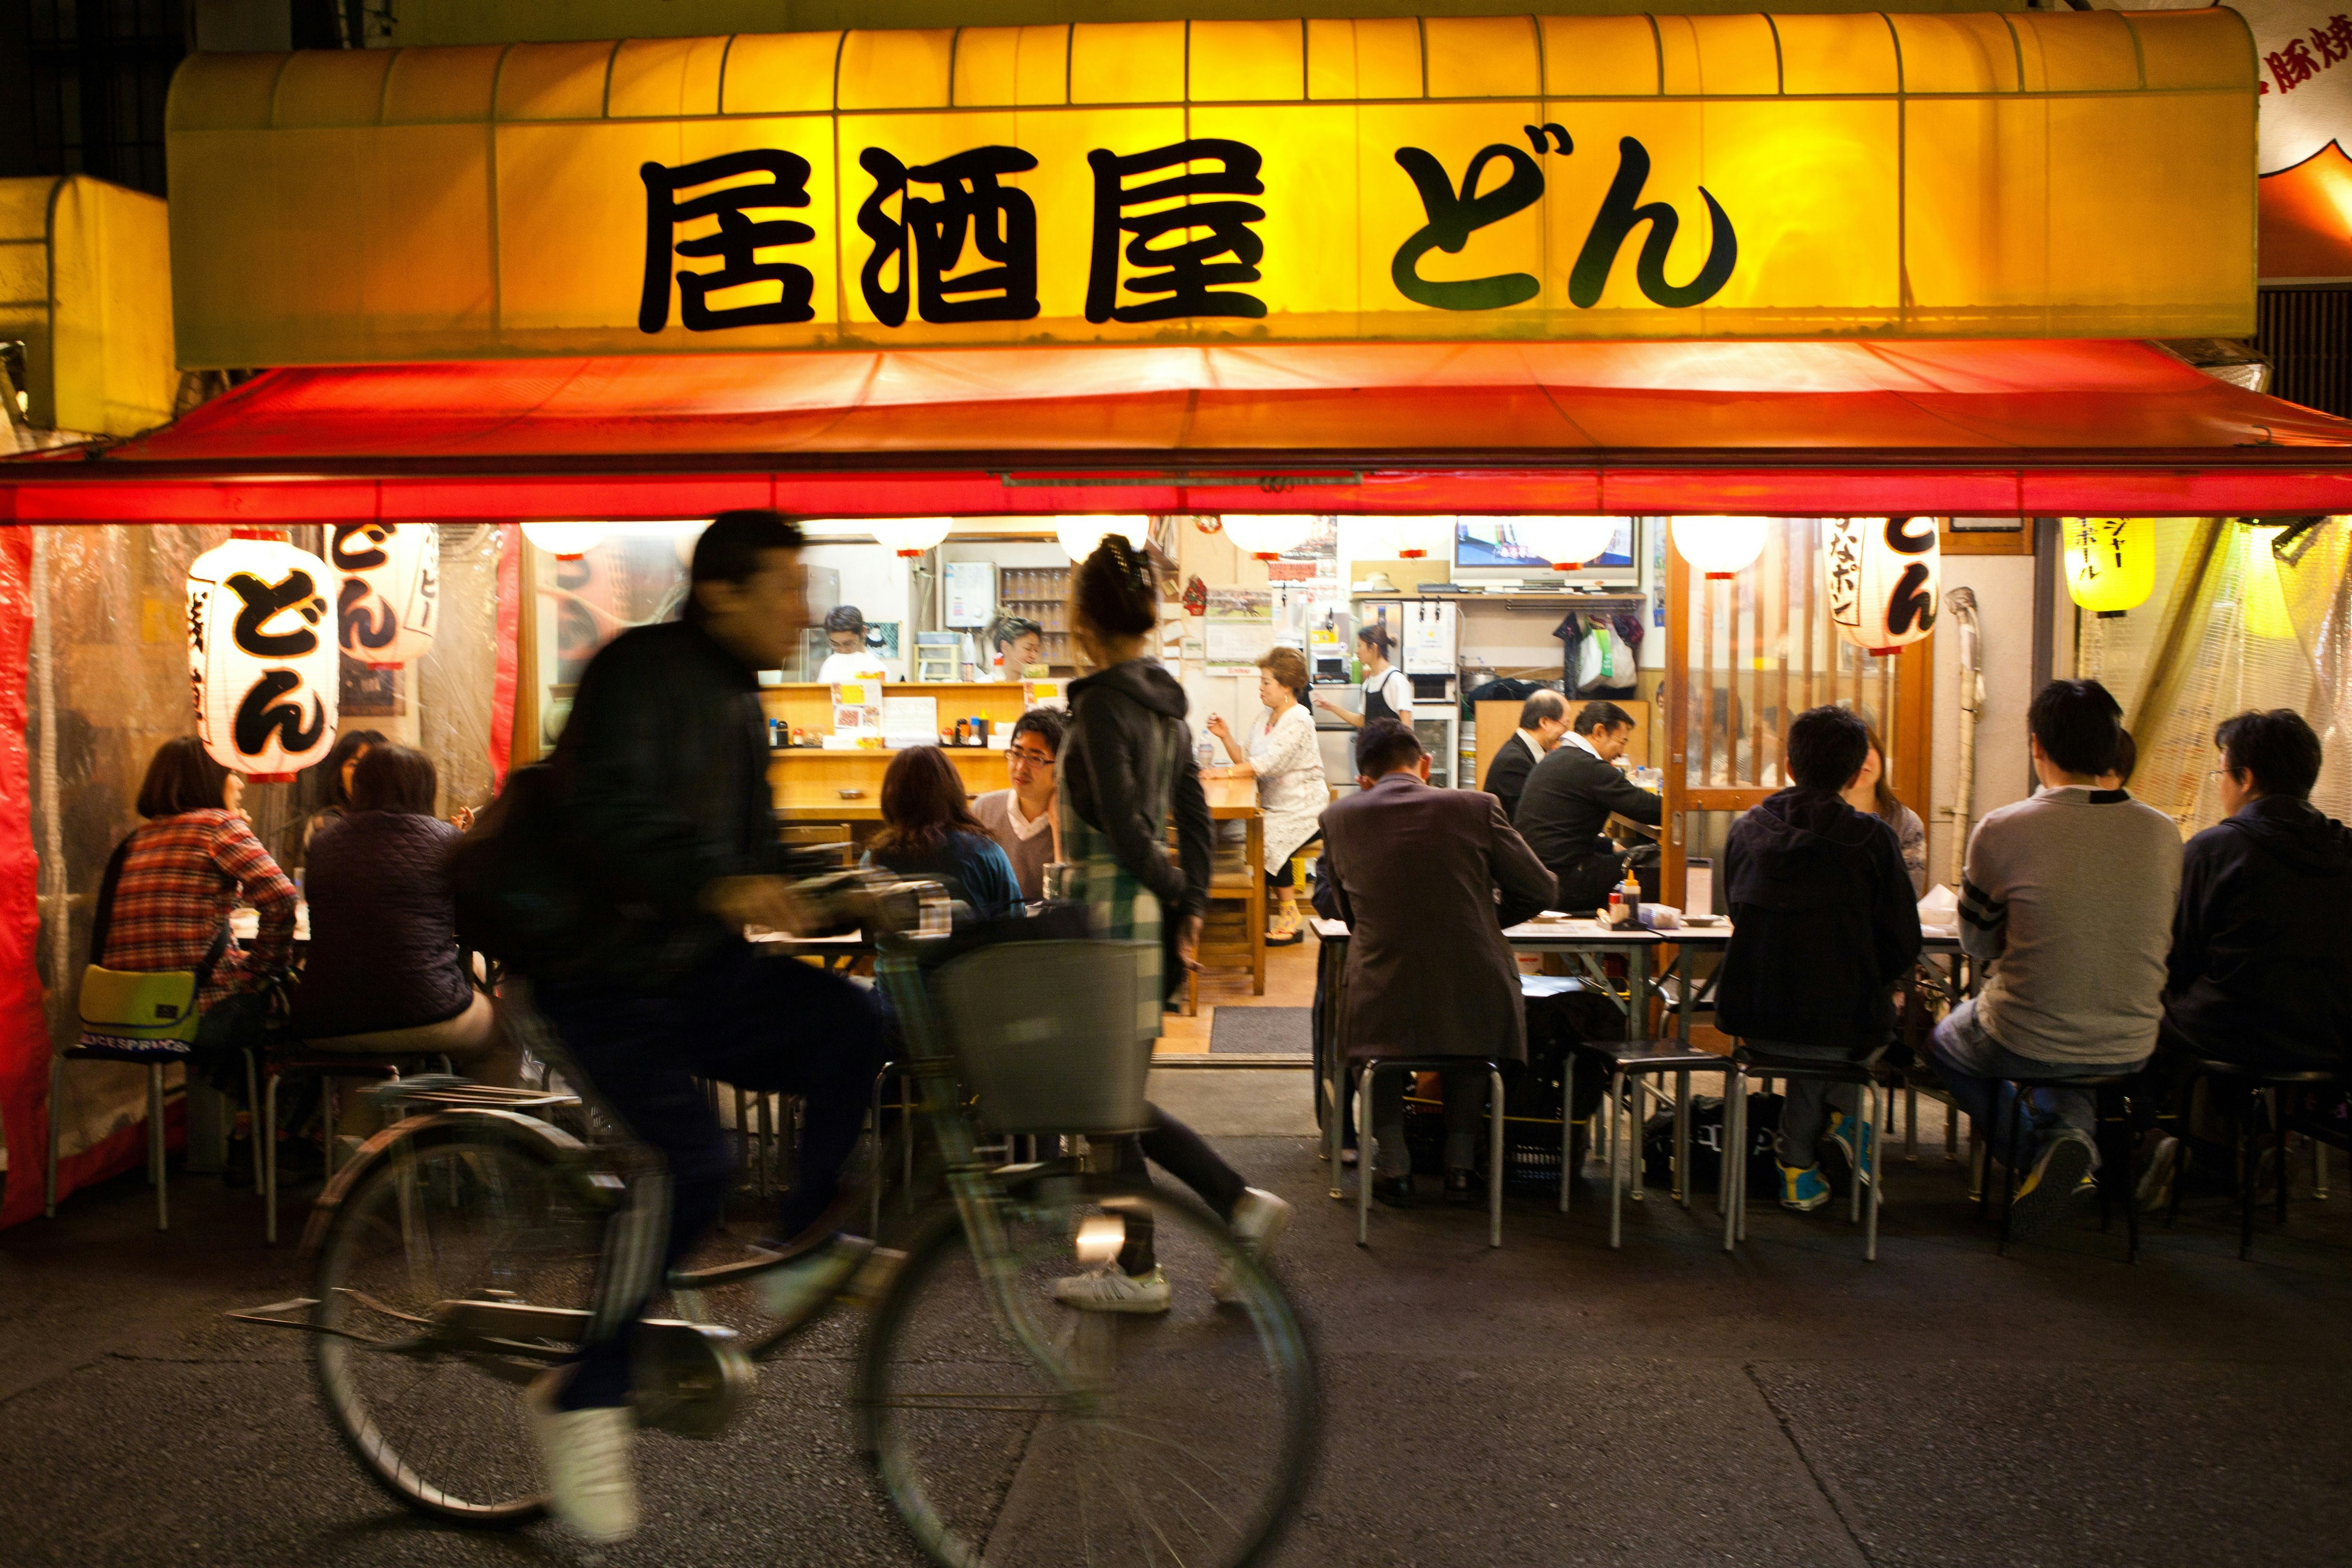 A man cycles past a cafe in Tokyo, which is open to the street, with diners and drinkers visible beneath its canopy roof and hanging lanterns